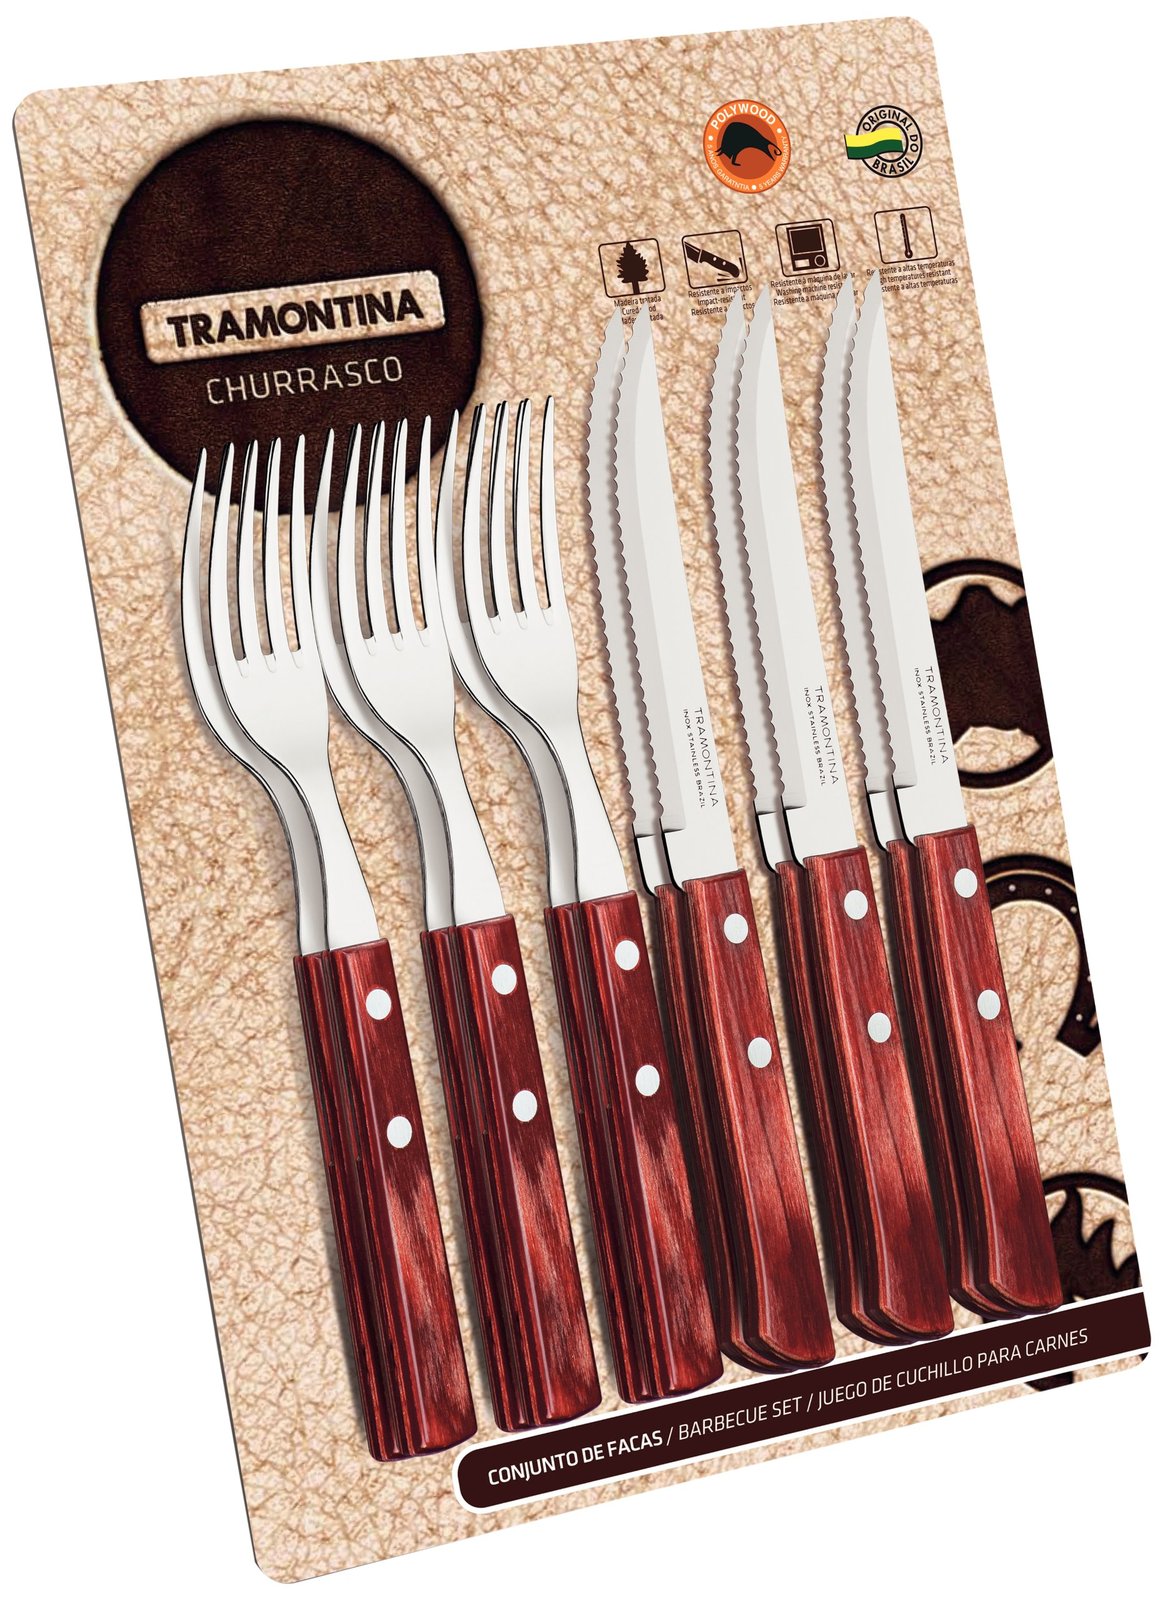 Tramontina 12-pieces Barbecue Set 6 Knives 6 Forks - $40.12